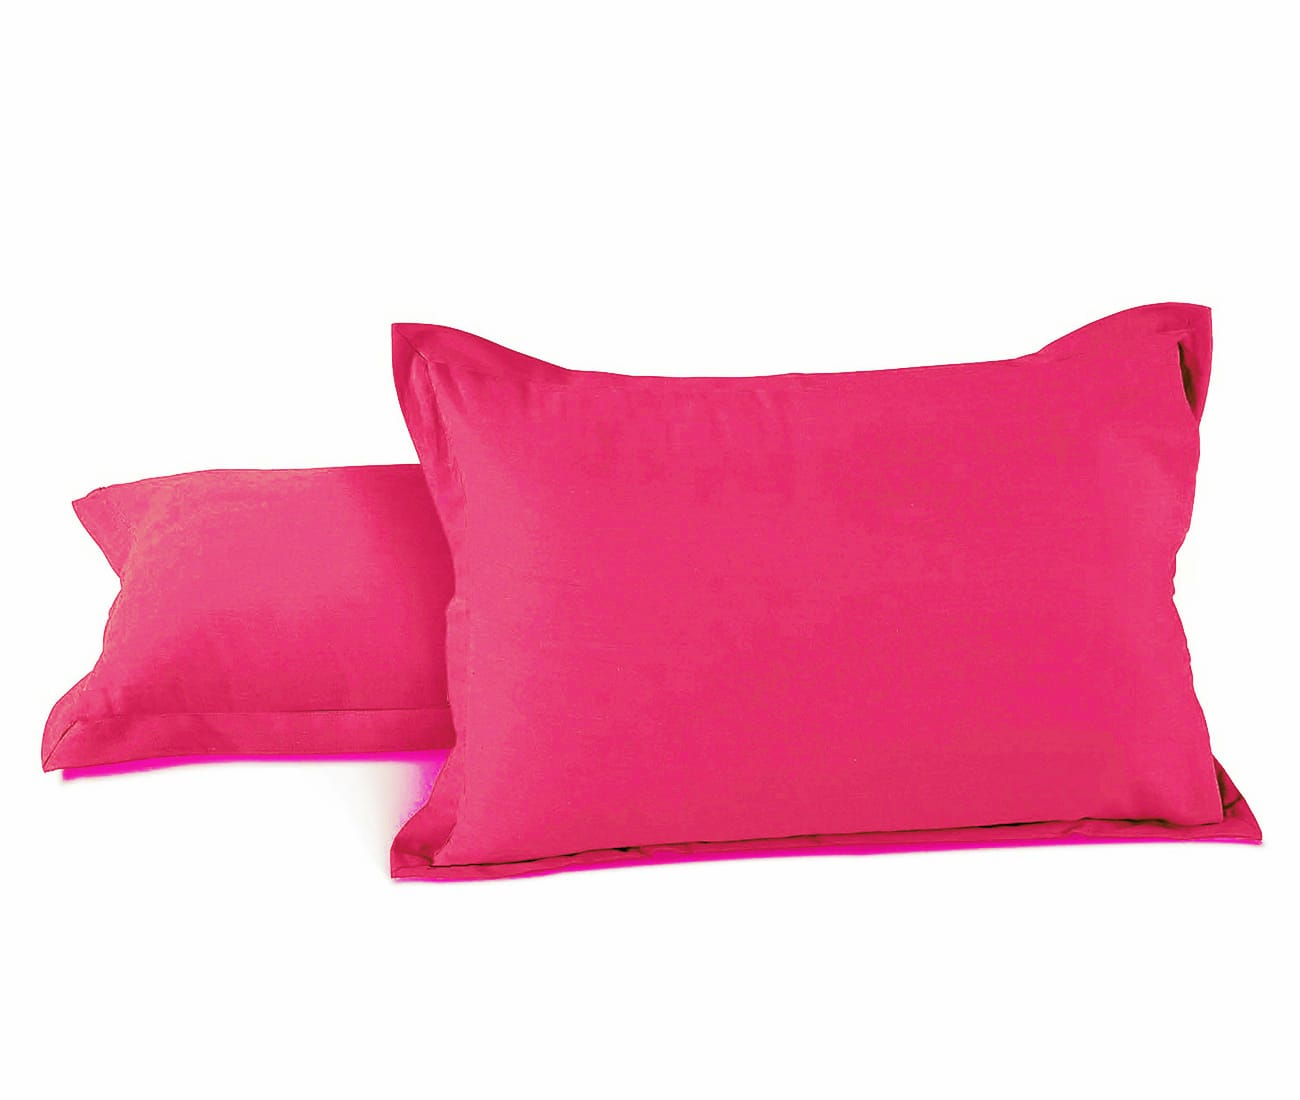 Soft 210 TC Plain Cotton Pillow Cover Set in Pink online in India(2 Pcs)